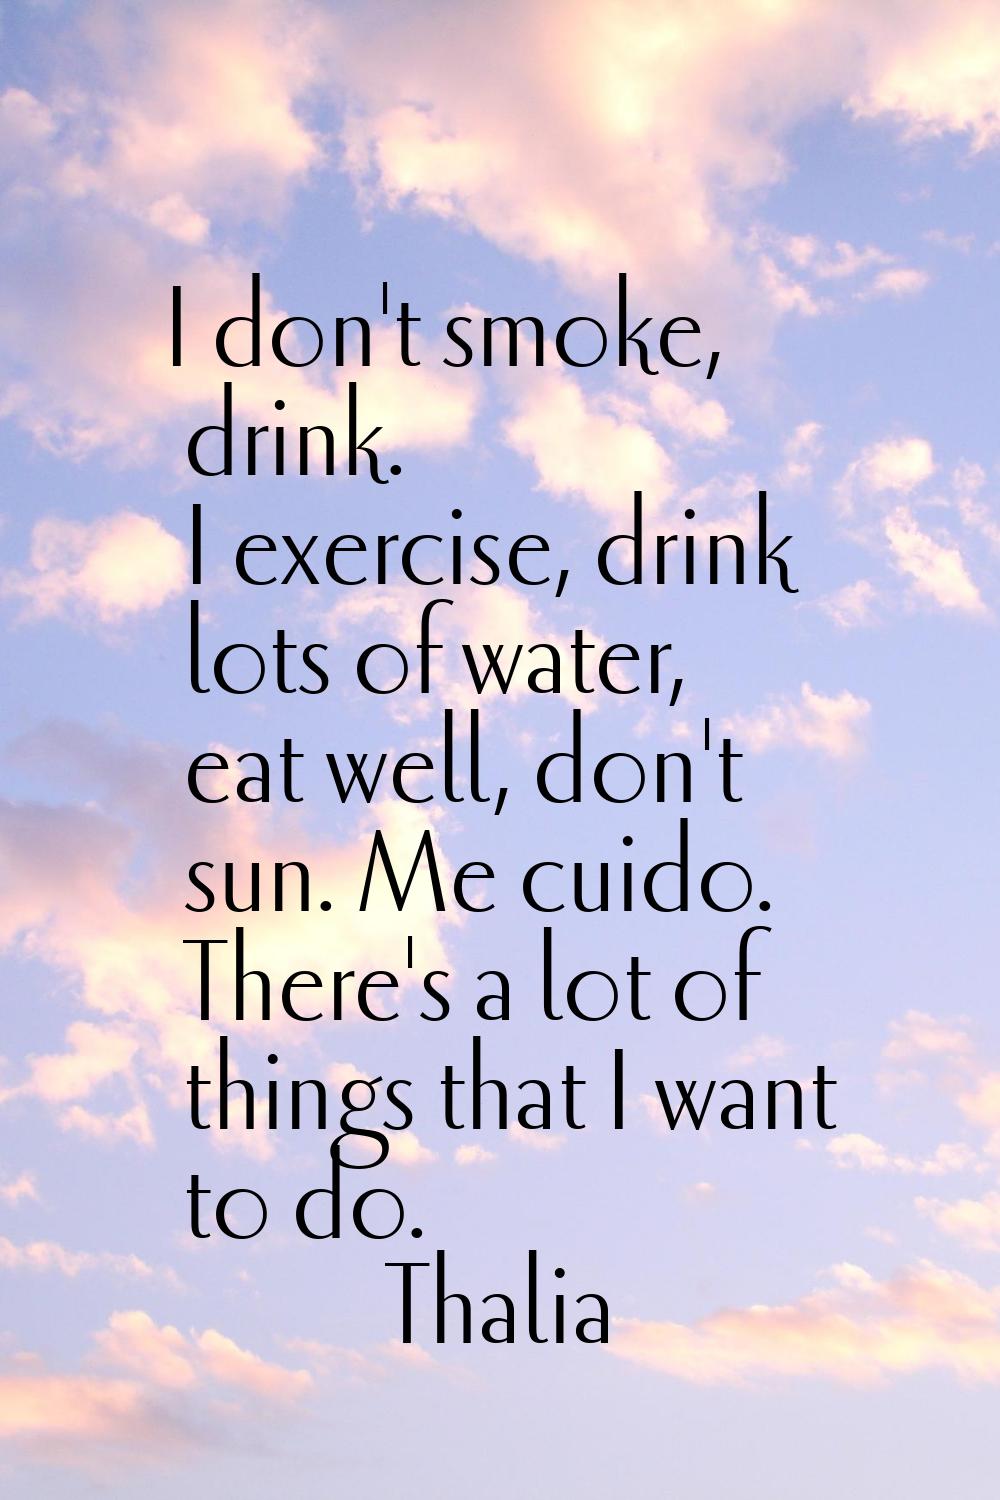 I don't smoke, drink. I exercise, drink lots of water, eat well, don't sun. Me cuido. There's a lot